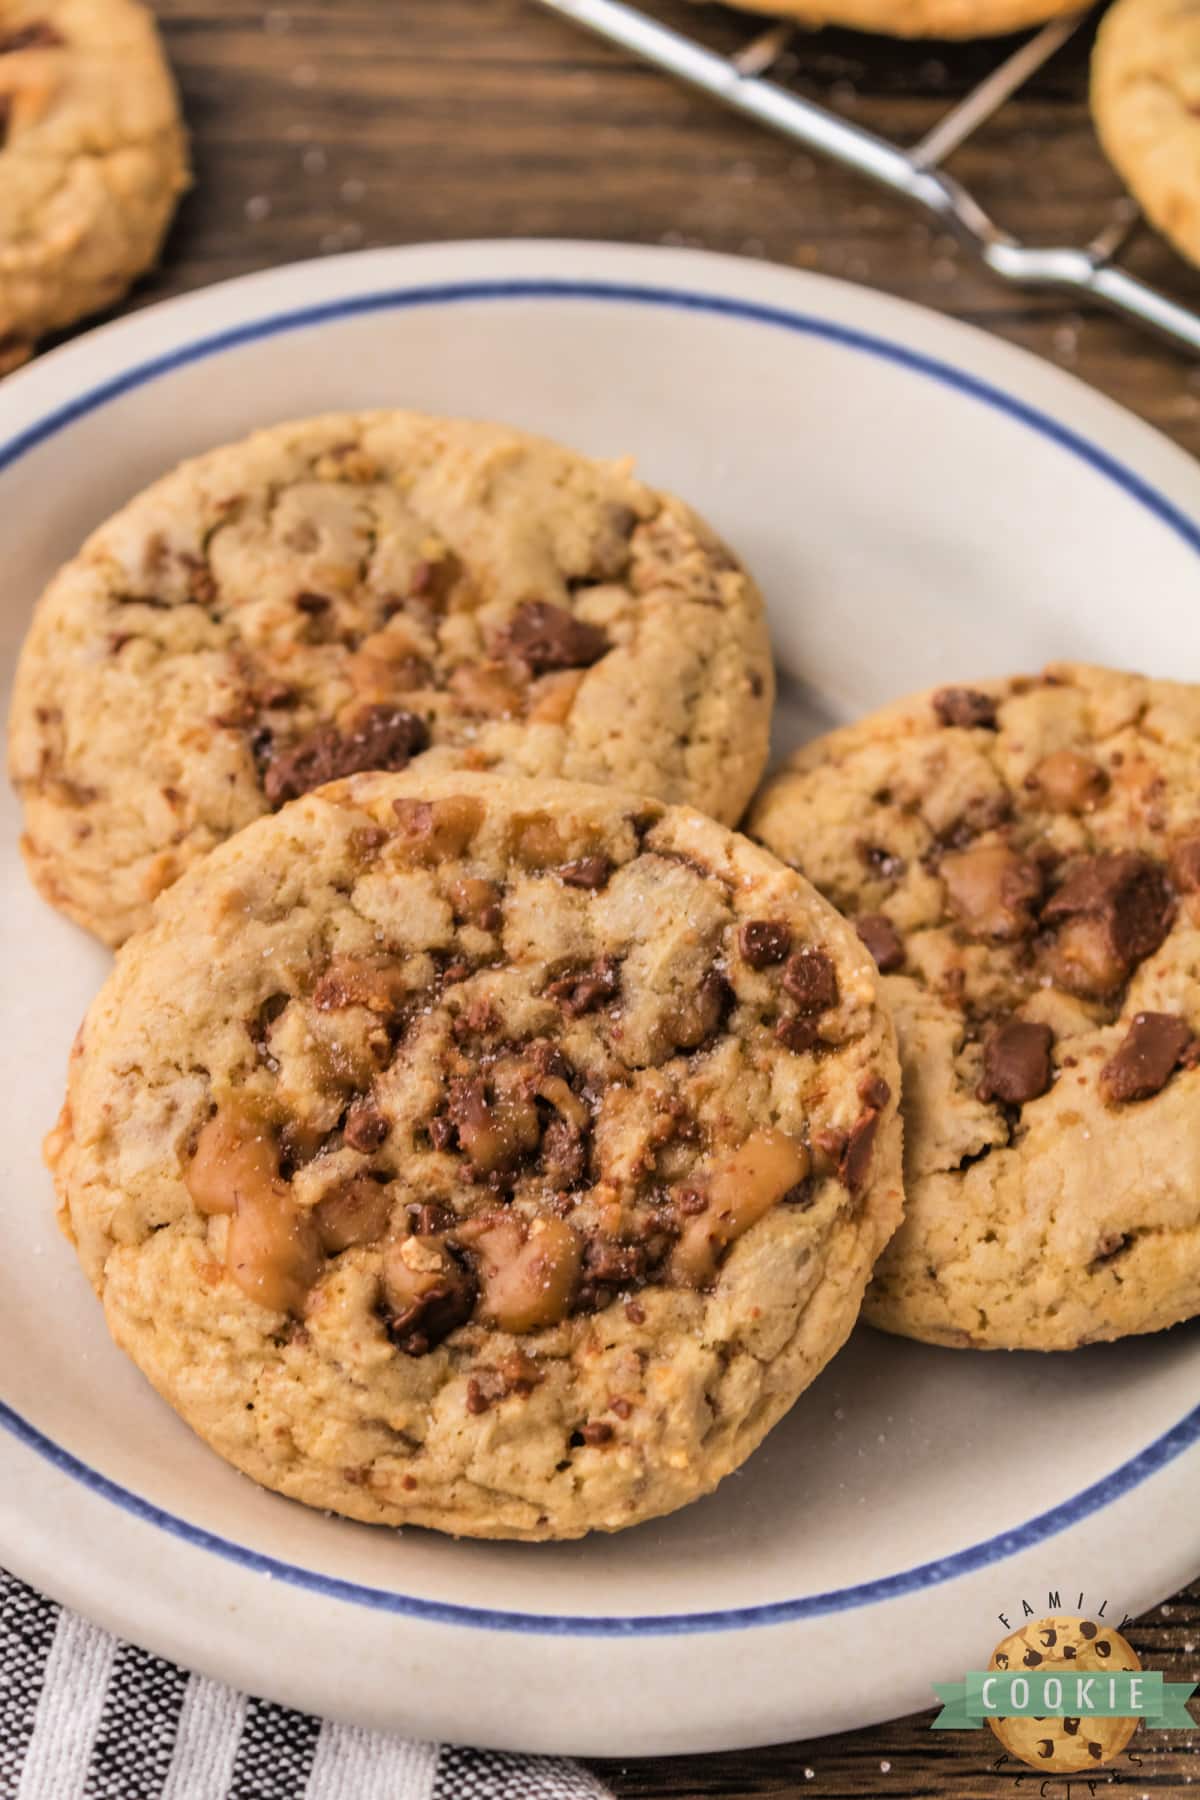 Heath Bar Cookies are soft, chewy and loaded with little bits of crunchy toffee. Simple heath bar cookie recipe that is absolutely delicious!